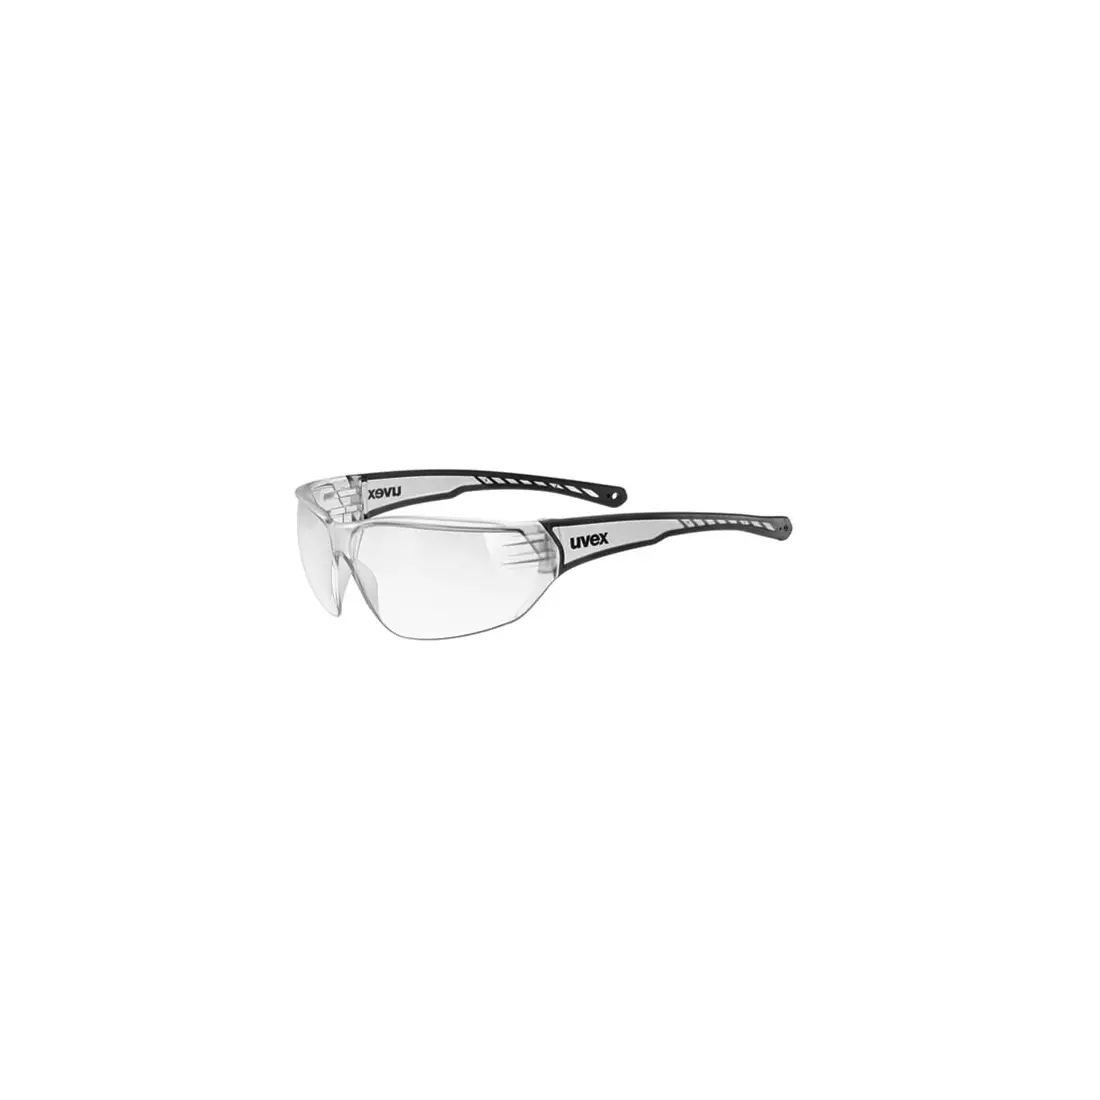 Cycling / sports glasses Uvex Sportstyle 204 farblos 53/0/525/9118/UNI SS19